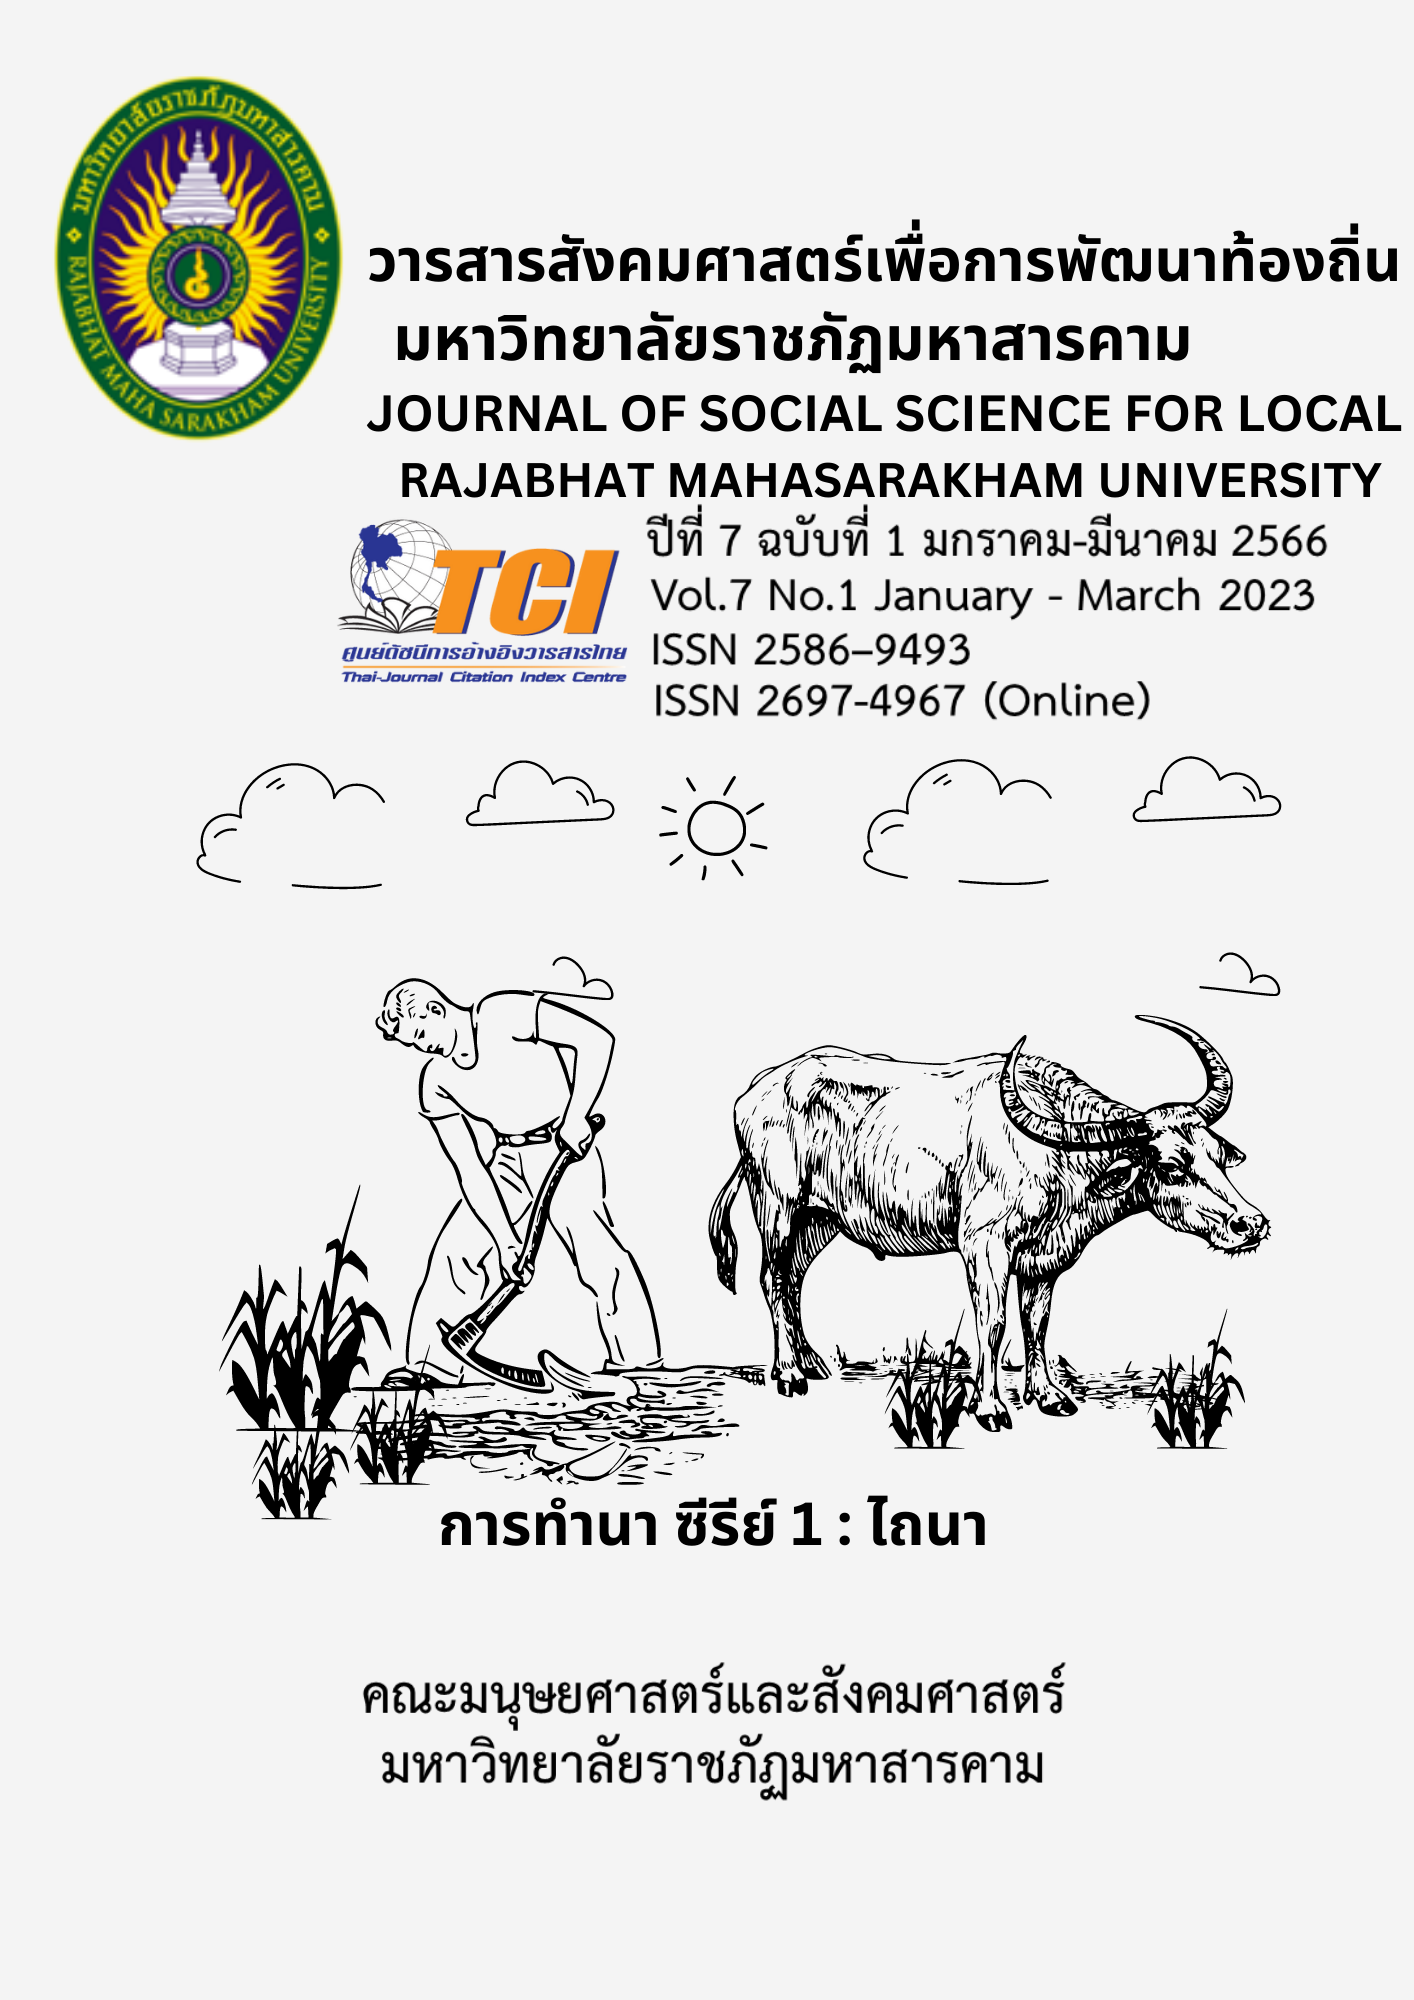 					View Vol. 7 No. 1 (2023): JOURNAL OF SOCIAL SCIENCE FOR LOCAL RAJABHAT MAHASARAKHAM UNIVERSITY
				